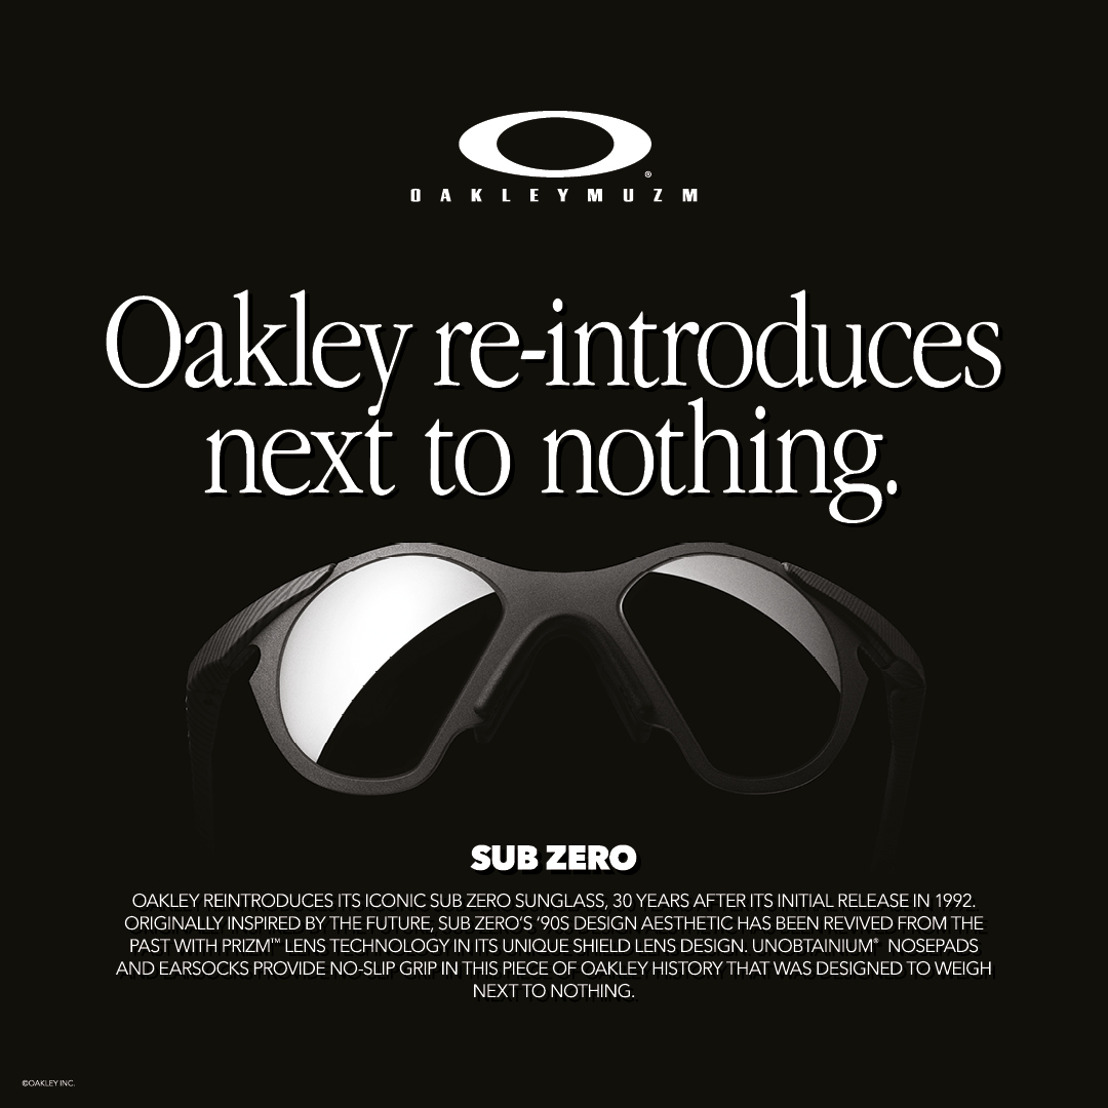 OAKLEY® UNEARTHS A RELIC FROM THE ‘90S WITH THE RE-LAUNCH OF SUB ZERO